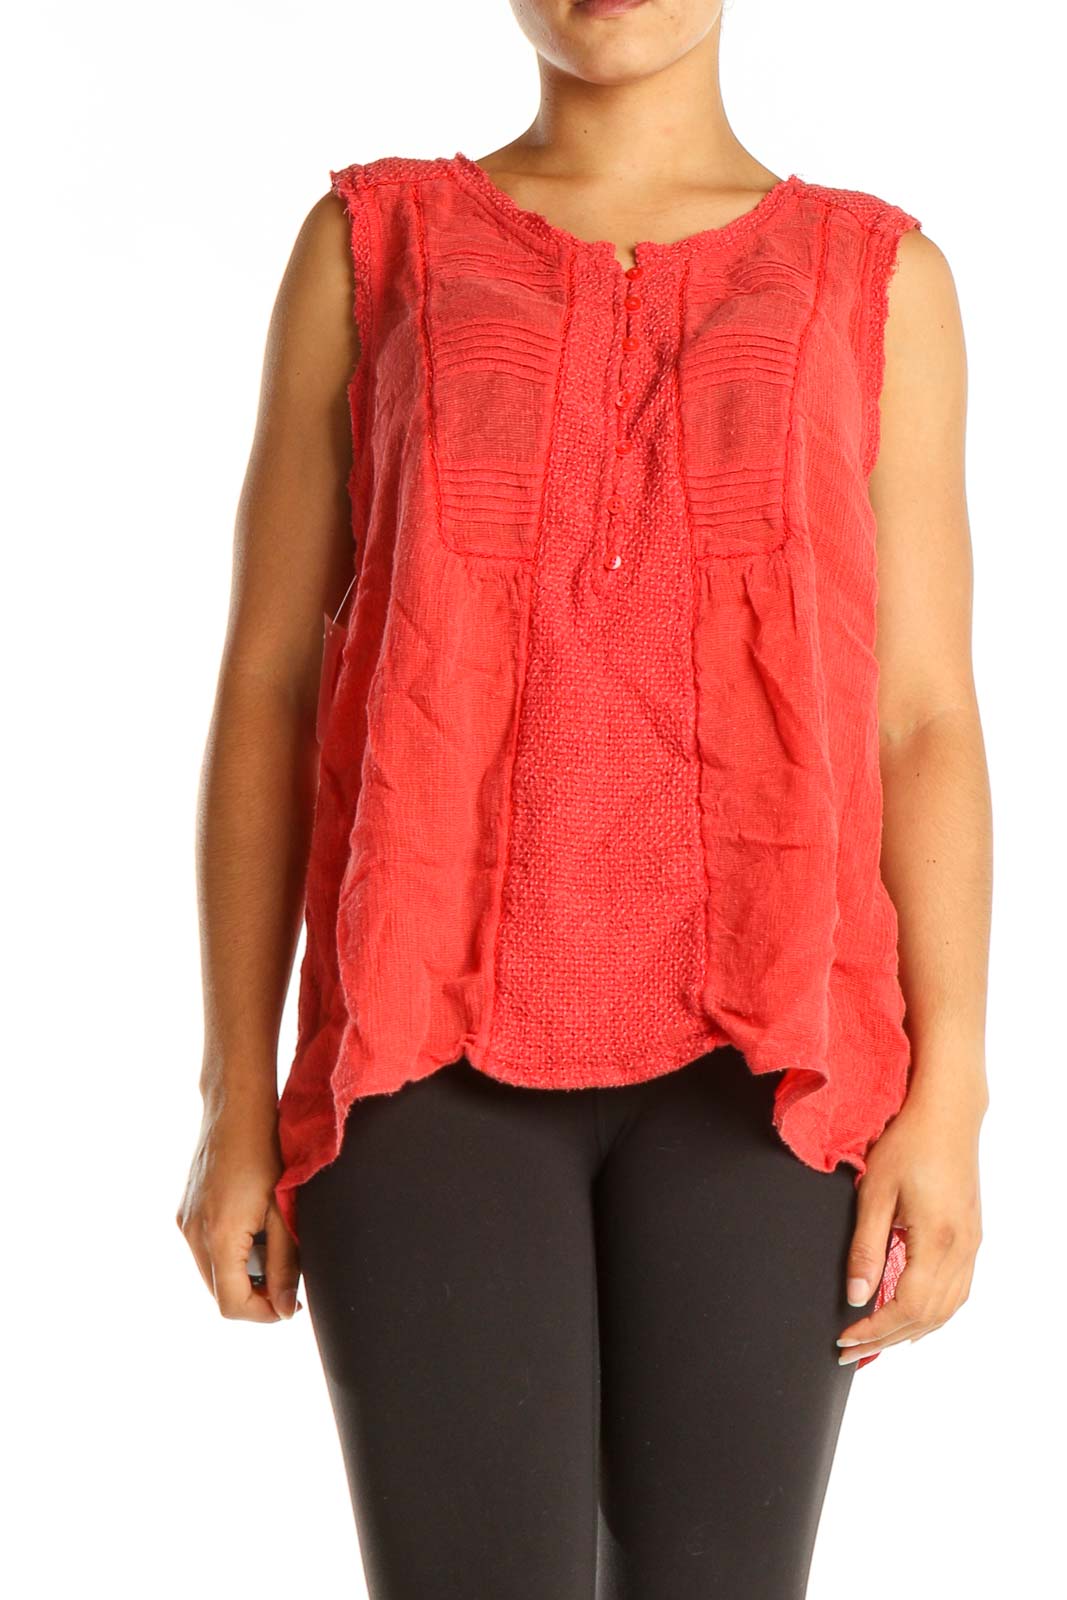 Red Bohemian Blouse Front